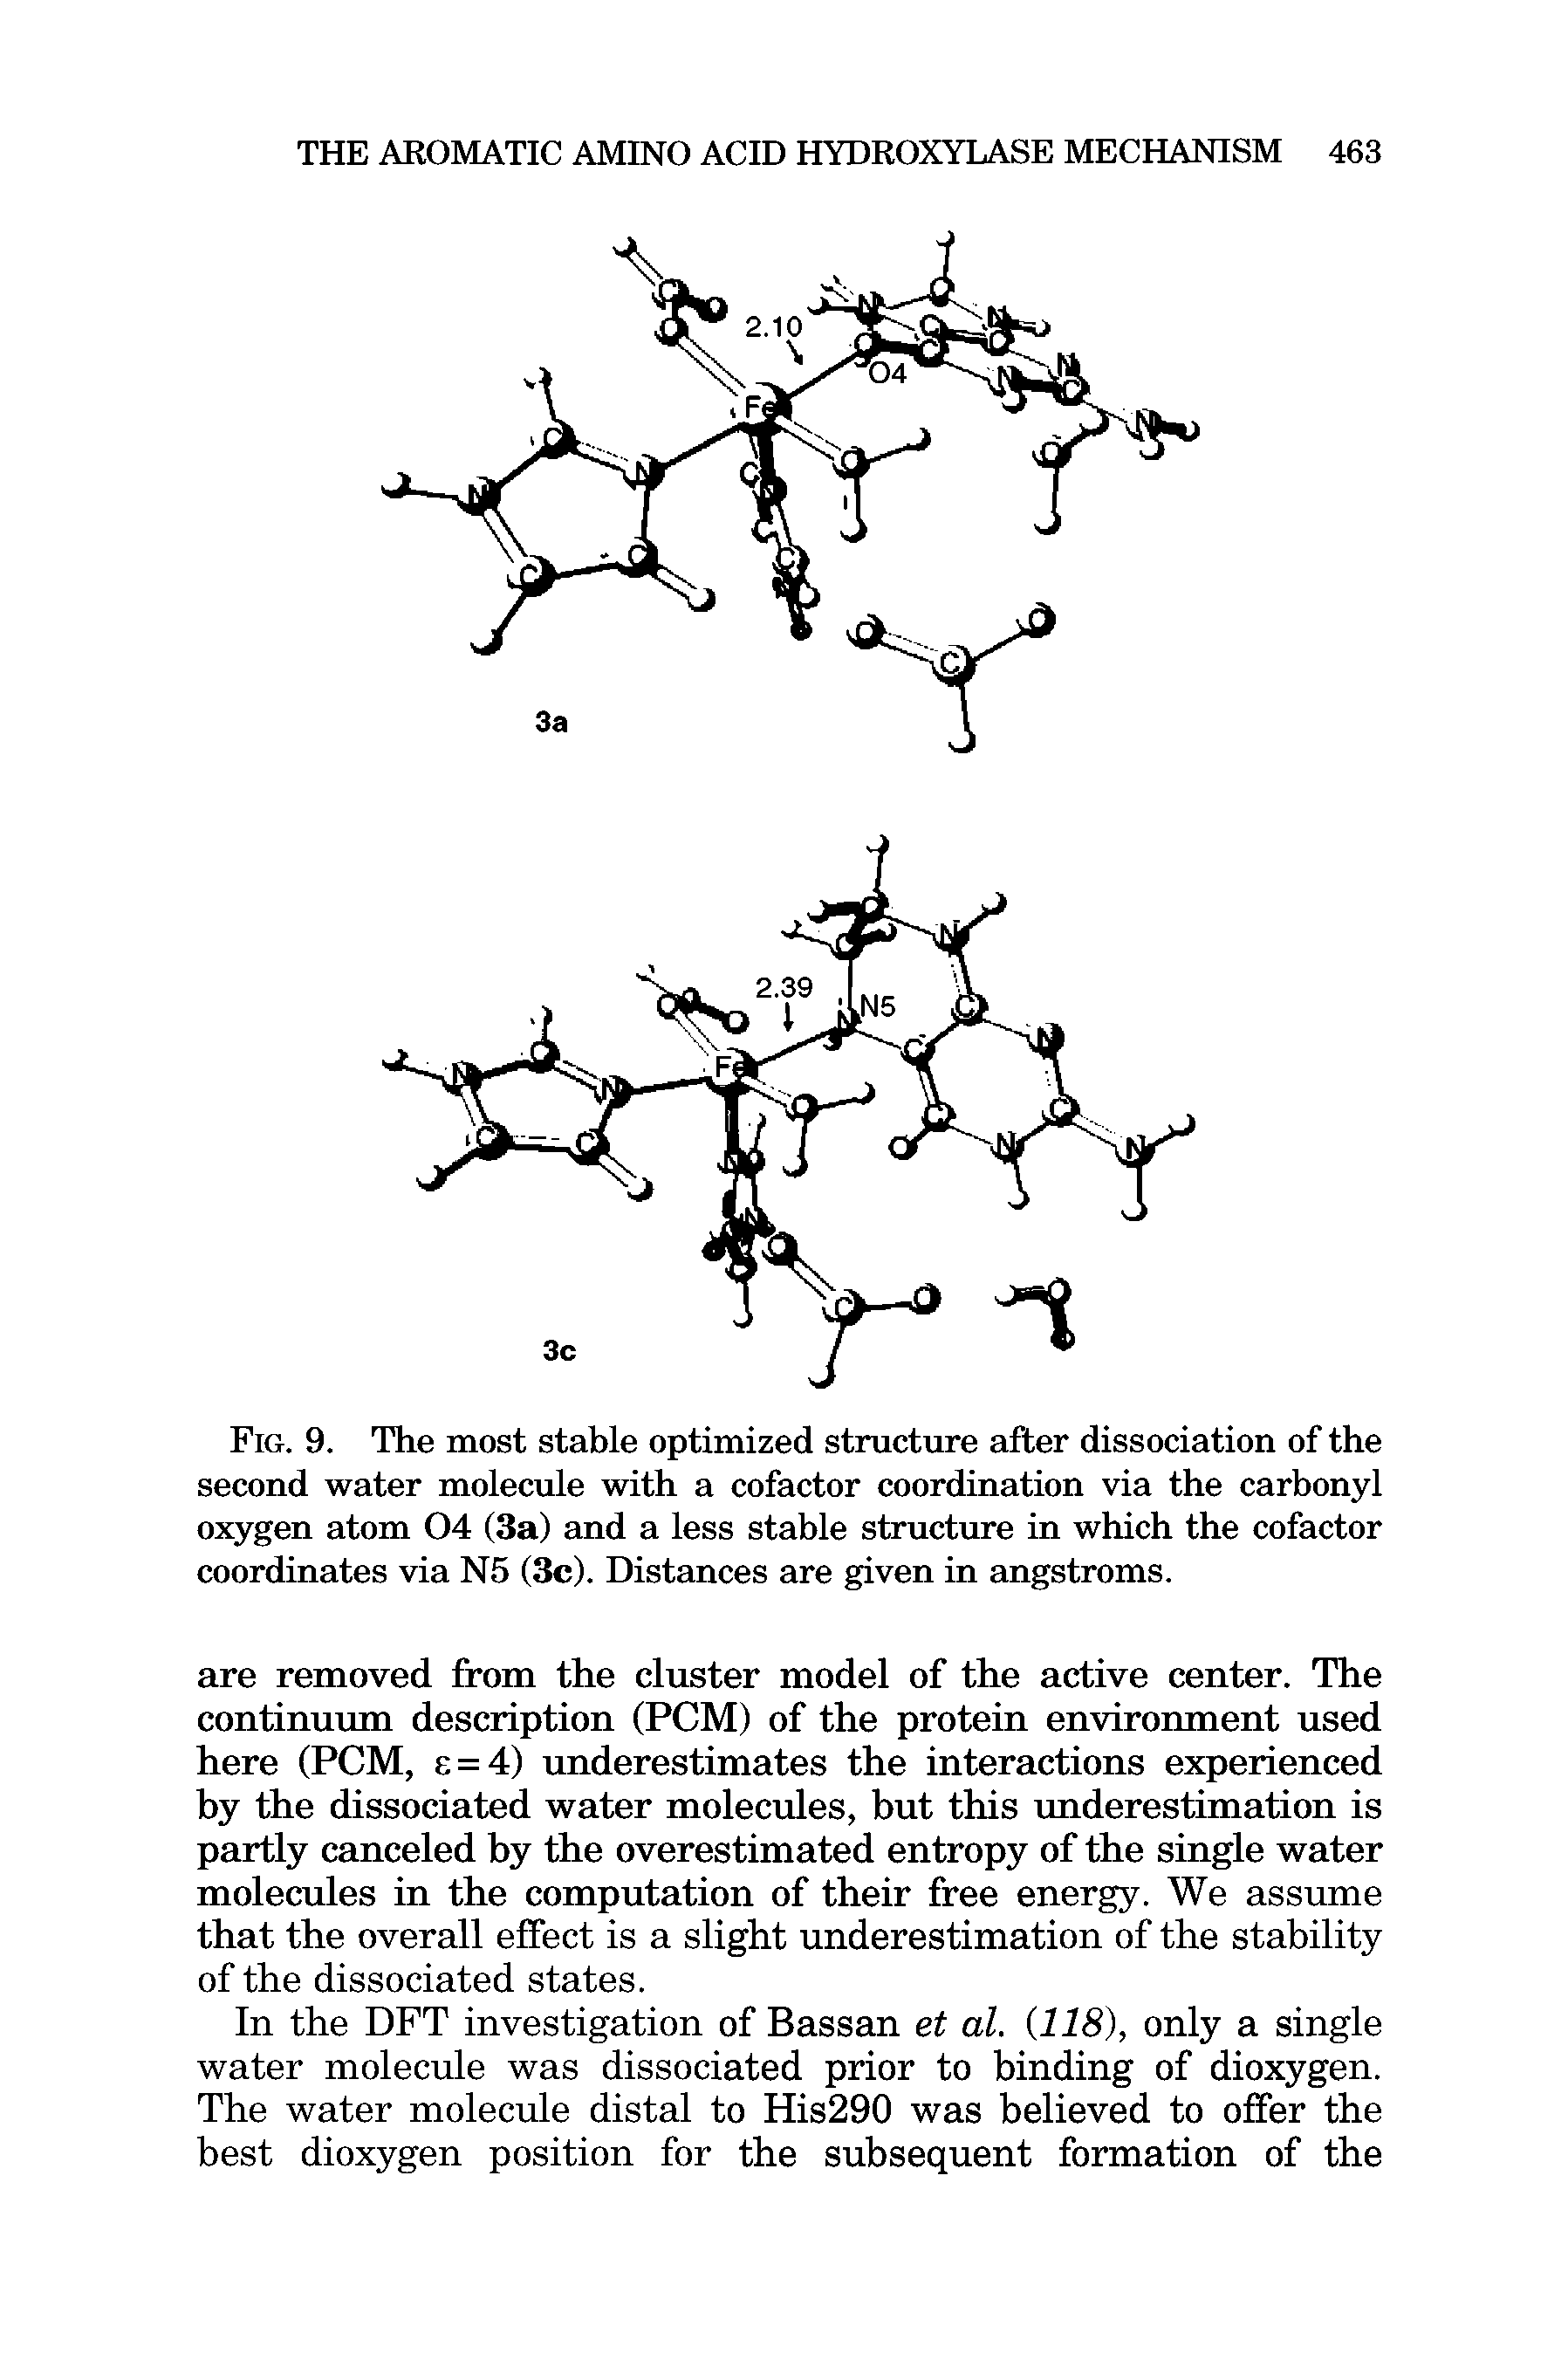 Fig. 9. The most stable optimized structure after dissociation of the second water molecule with a cofactor coordination via the carbonyl oxygen atom 04 (3a) and a less stable structure in which the cofactor coordinates via N5 (3c). Distances are given in angstroms.